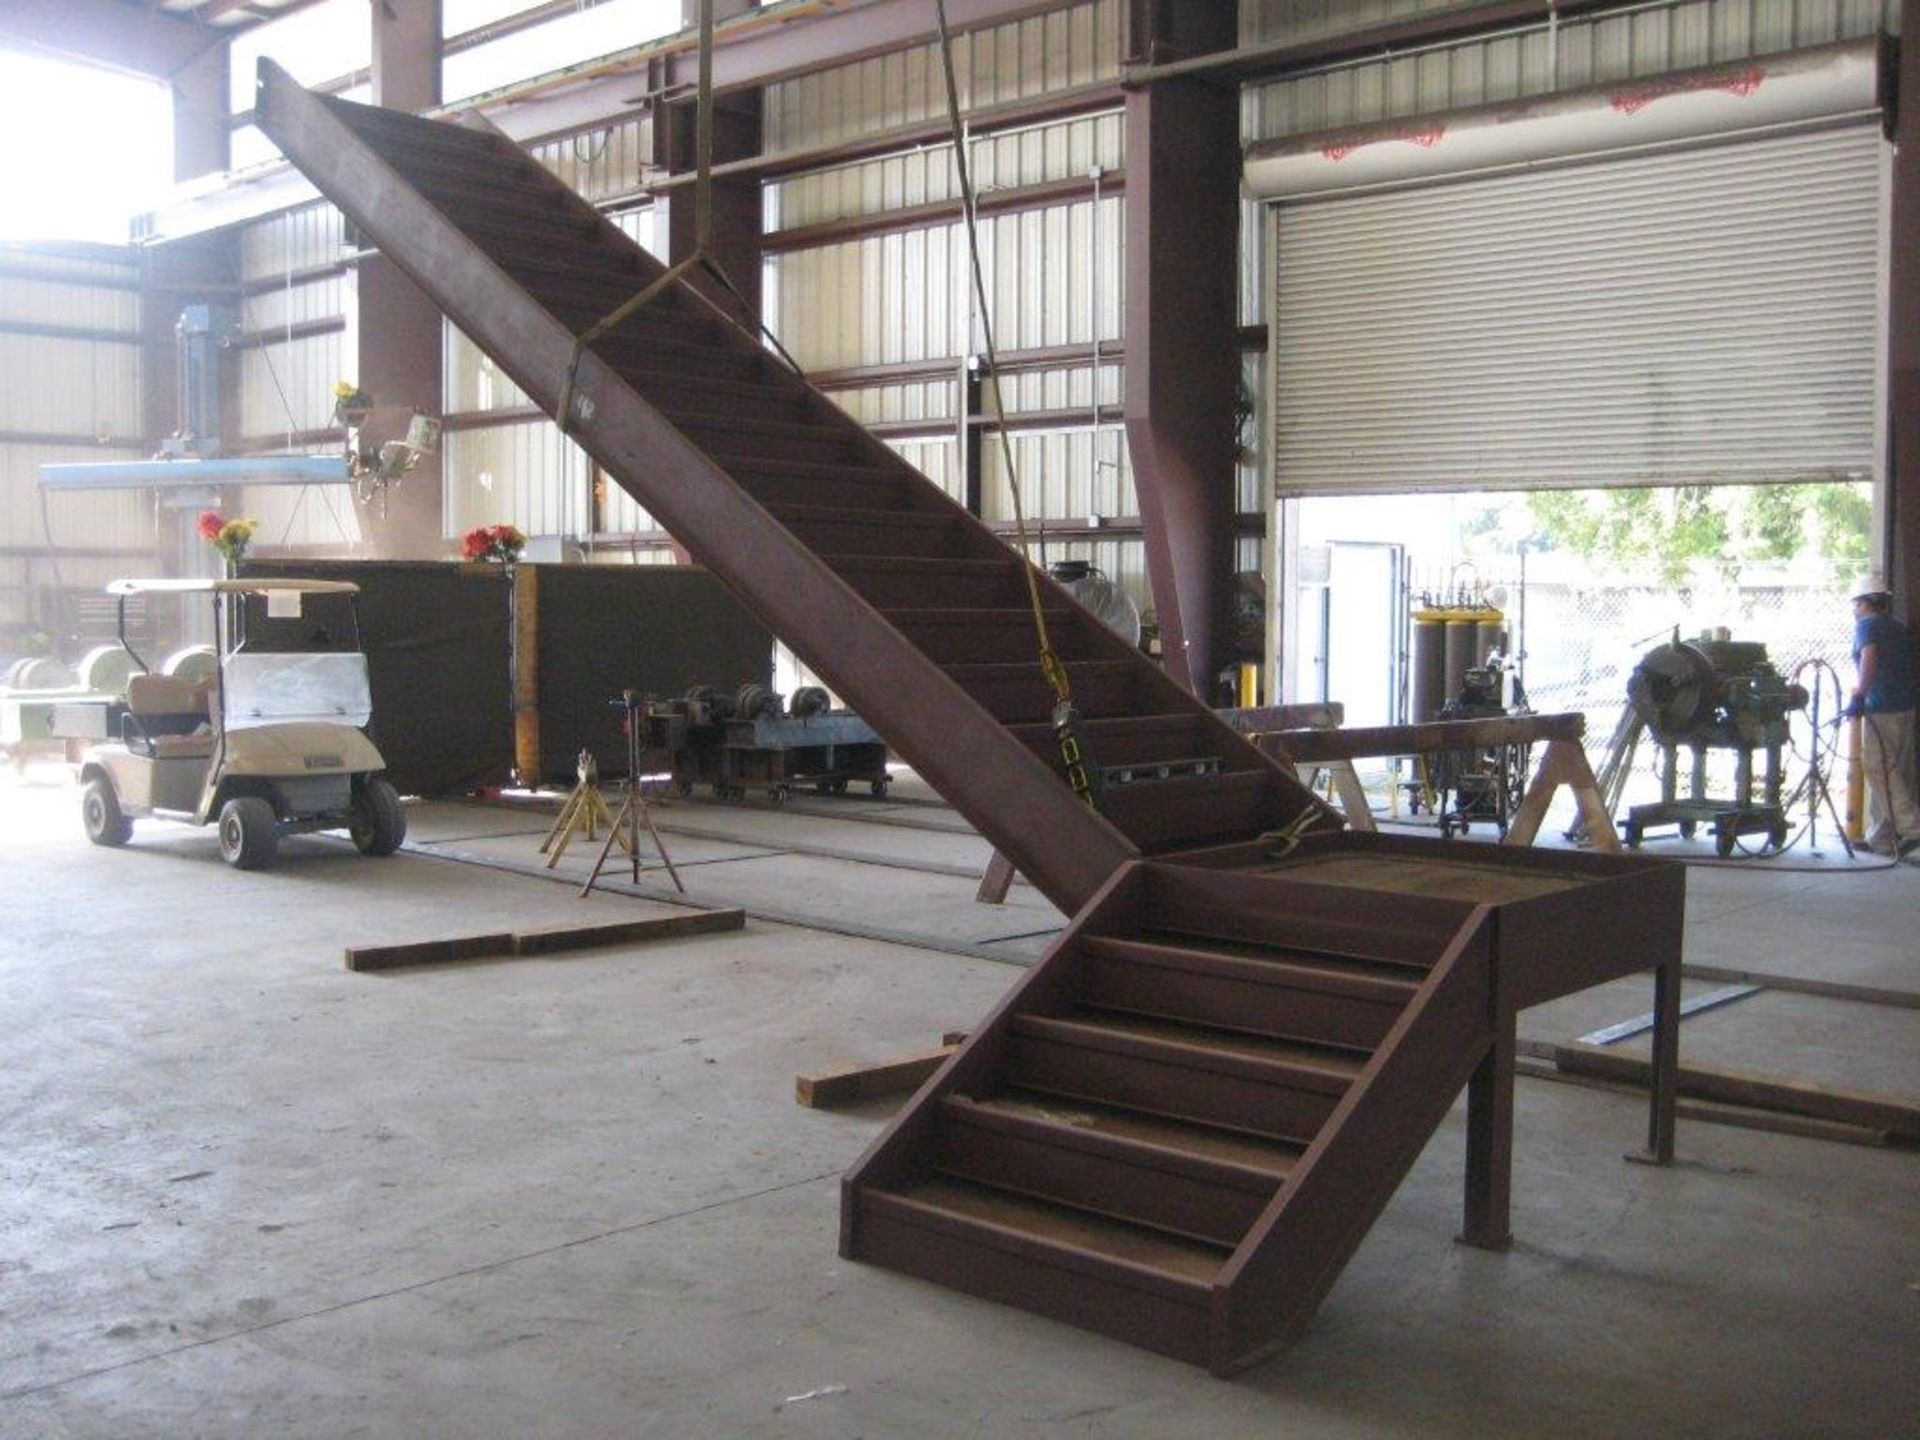 HEAVY STRUCTURAL MEZZANINE, CAN BE USED FOR A SECOND FLOOR IN A WAREHOUSE, COMPLETE NEVER USED - Image 3 of 8